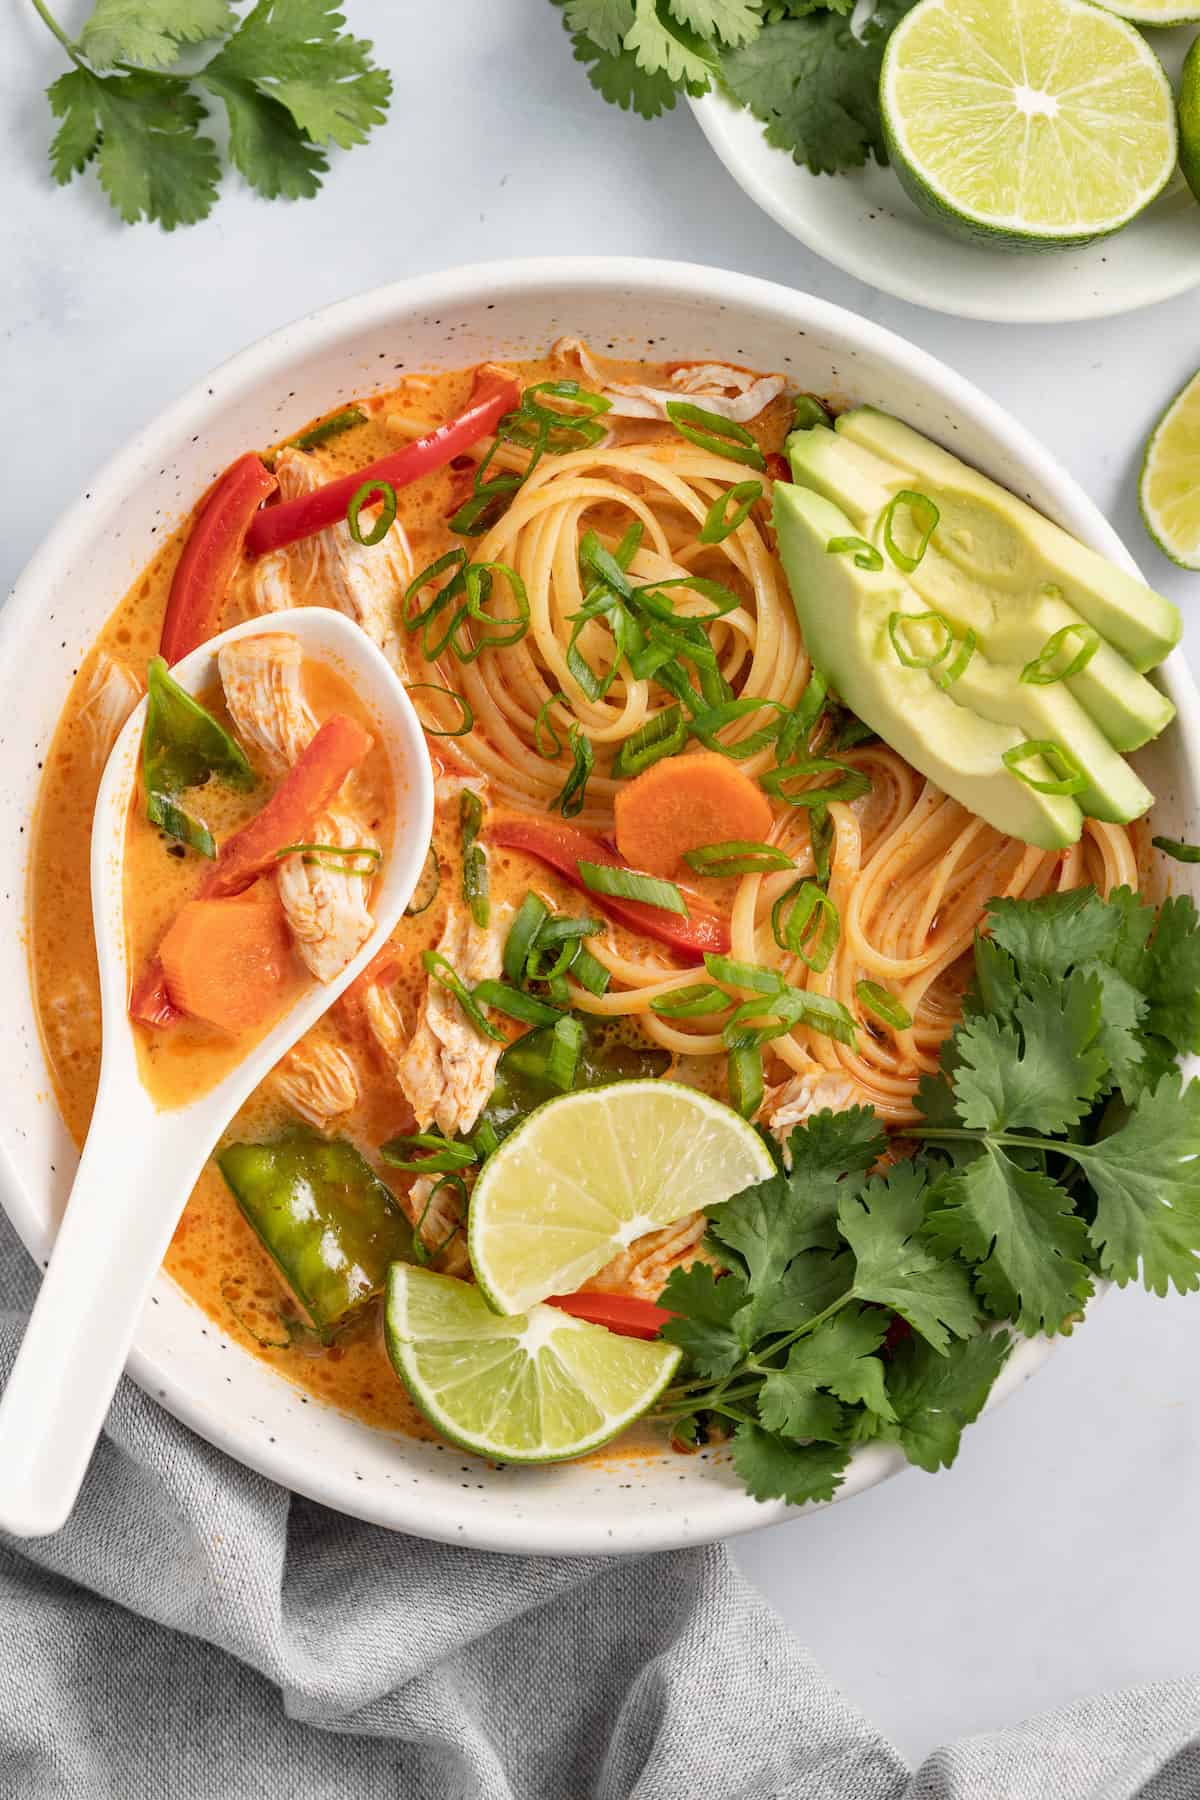 thai chicken noodle soup with an orange colored broth, rice noodles, avocados, and fresh herbs with a ladle spoon